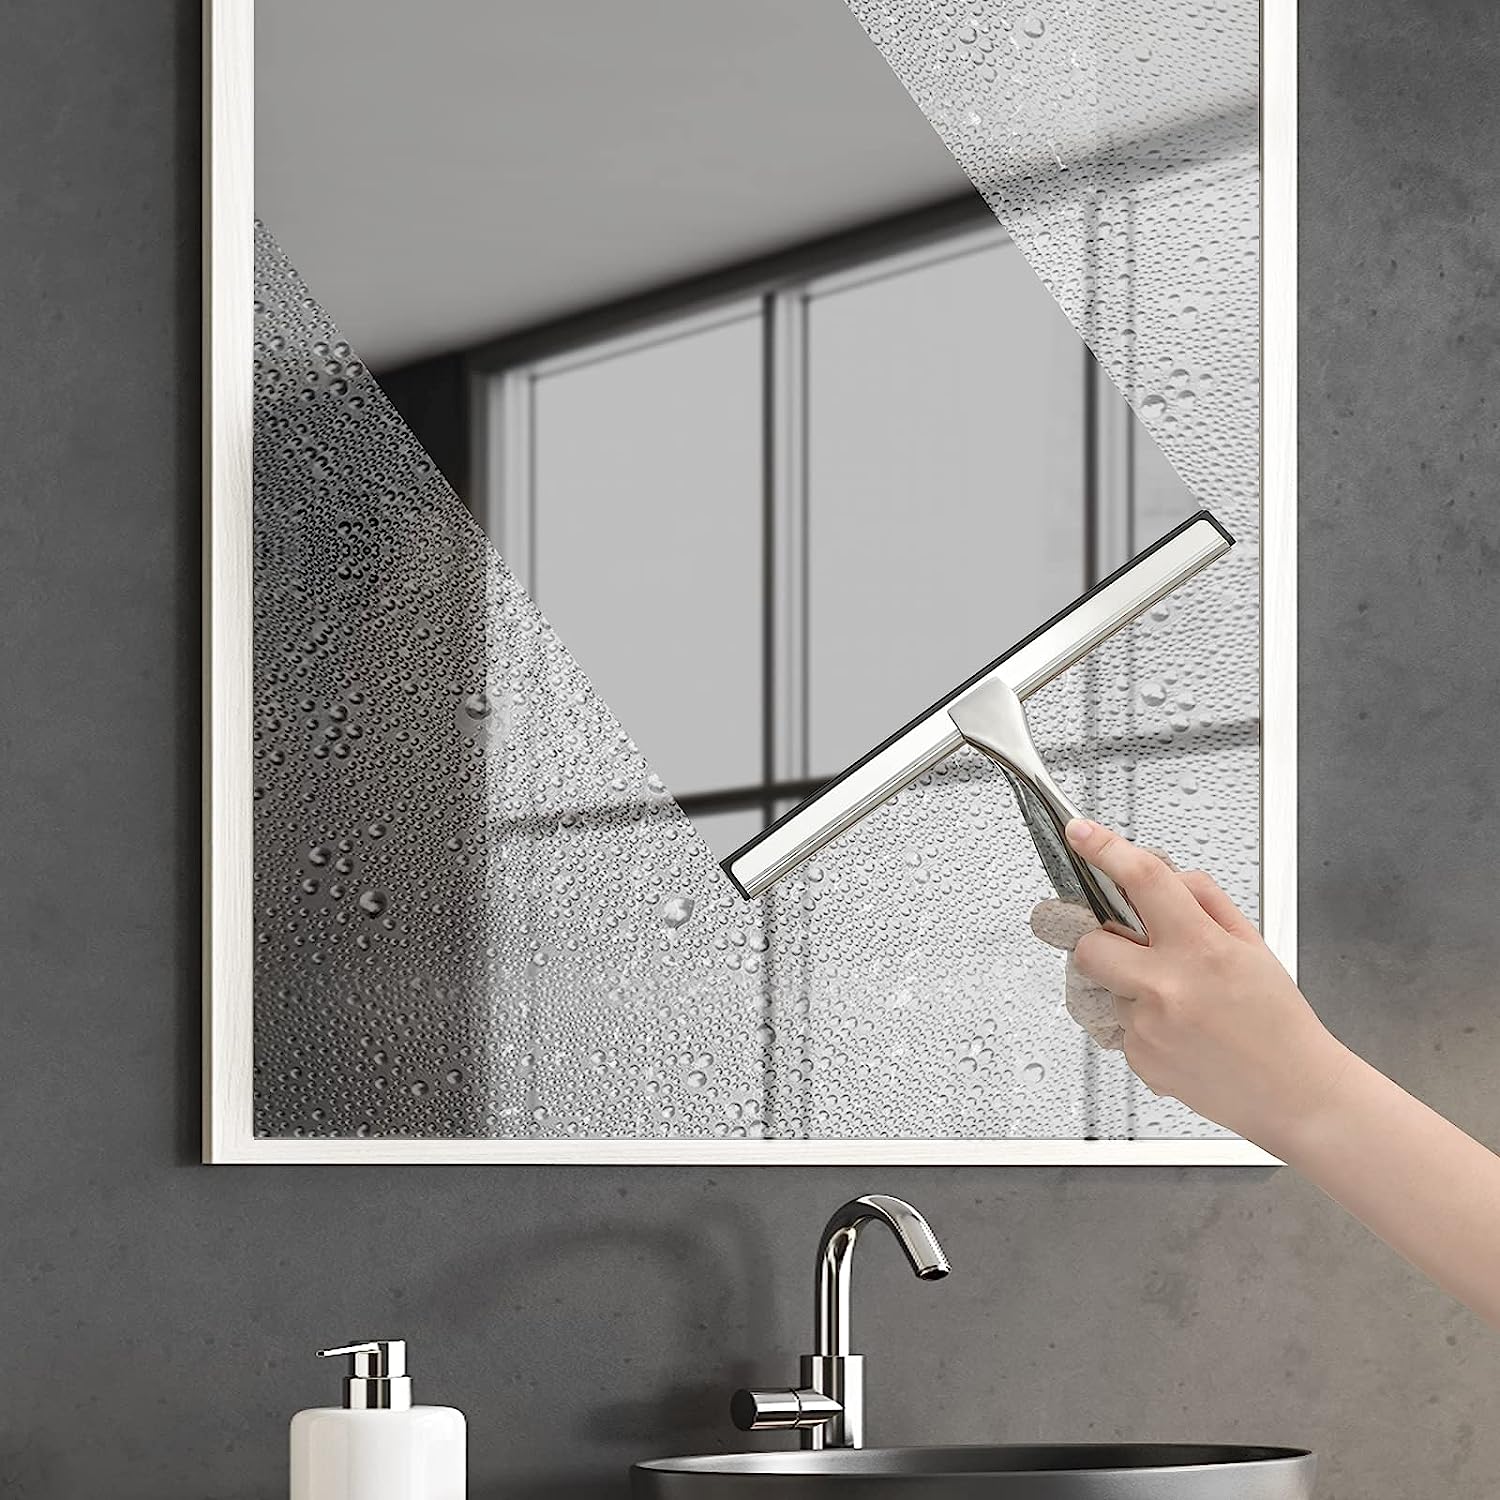 All-Purpose Shower Squeegee for Shower Doors